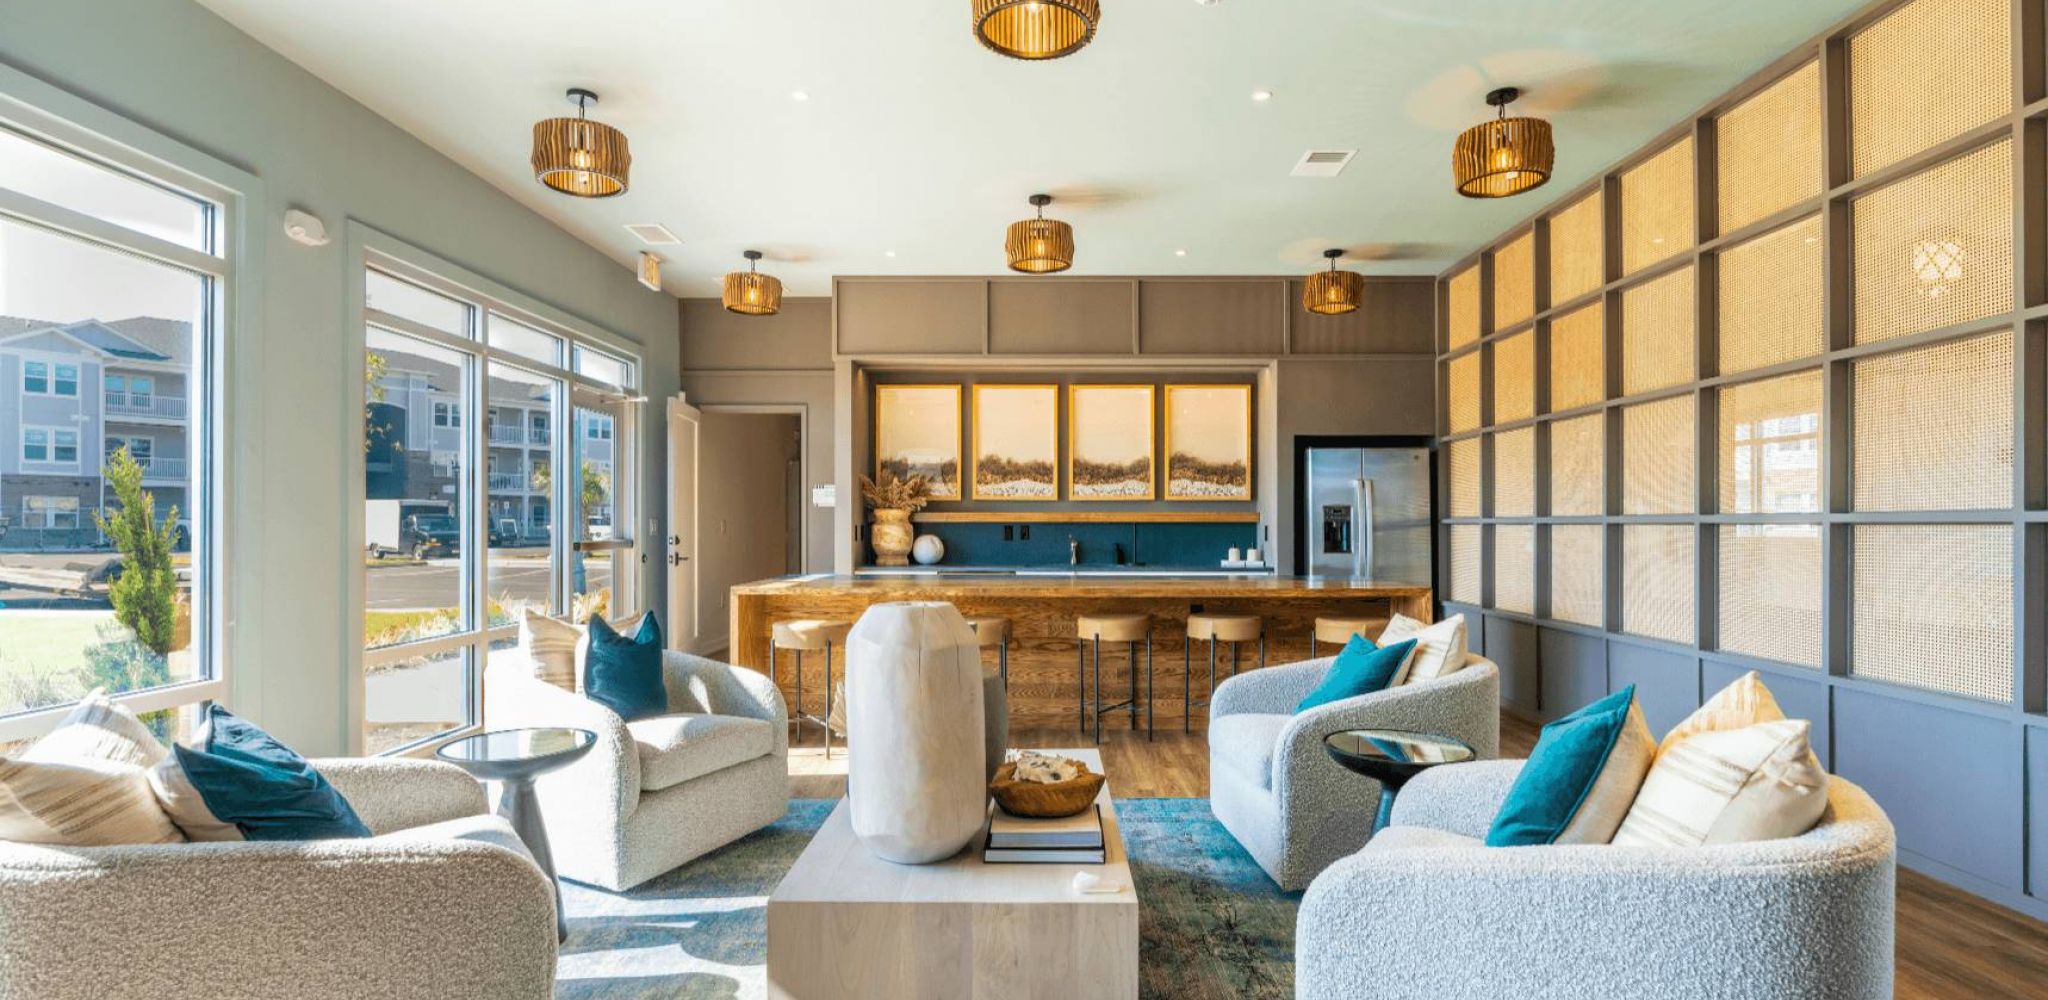 Hawthorne Waterway resident clubhouse amenity with seating area and beautiful finishes